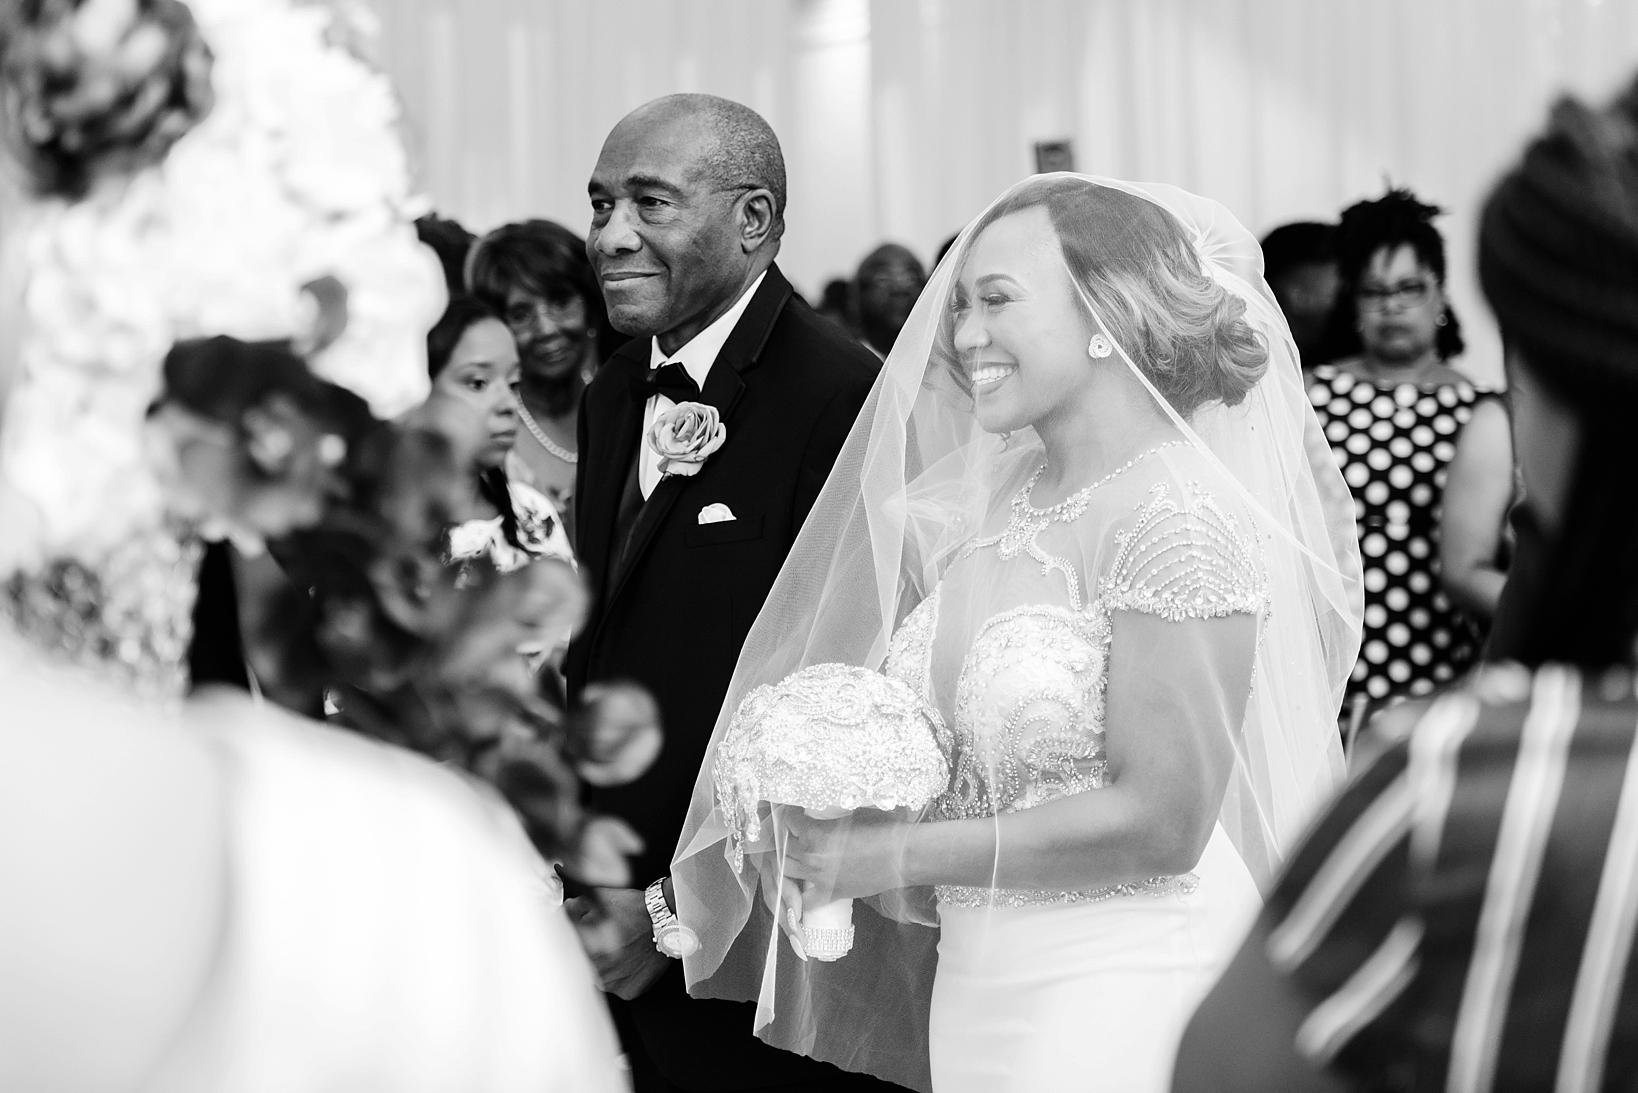 The bride smiling from ear to ear as she walks down the aisle with her Dad